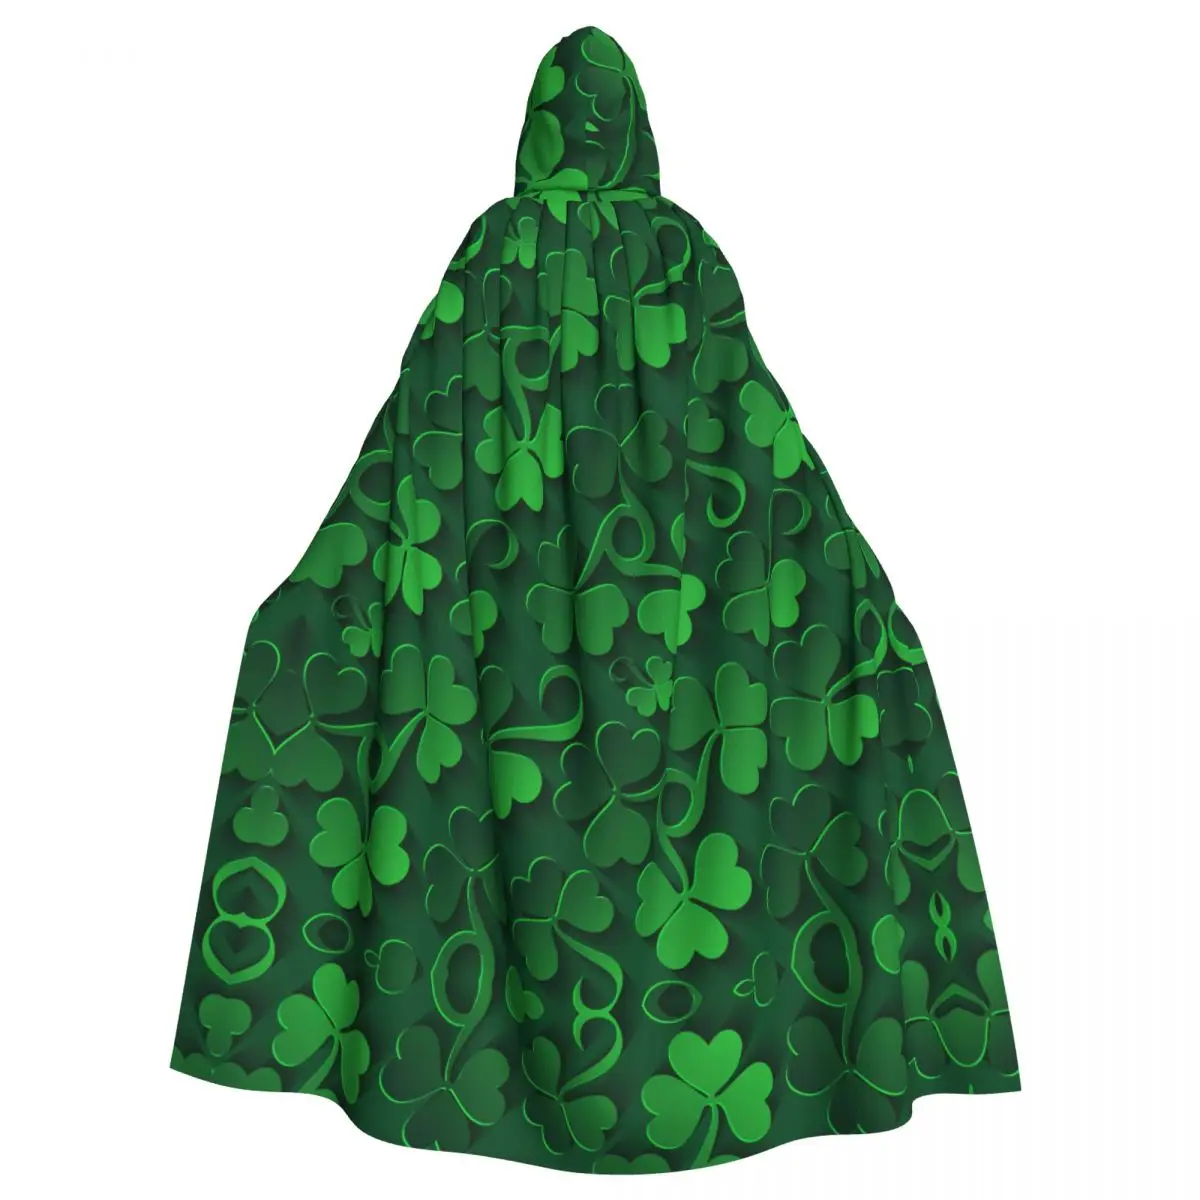 

Unisex Witch Party Reversible Hooded Adult Vampires Cape Cloak Shamrock Leaf Clover St. Patrick's Day